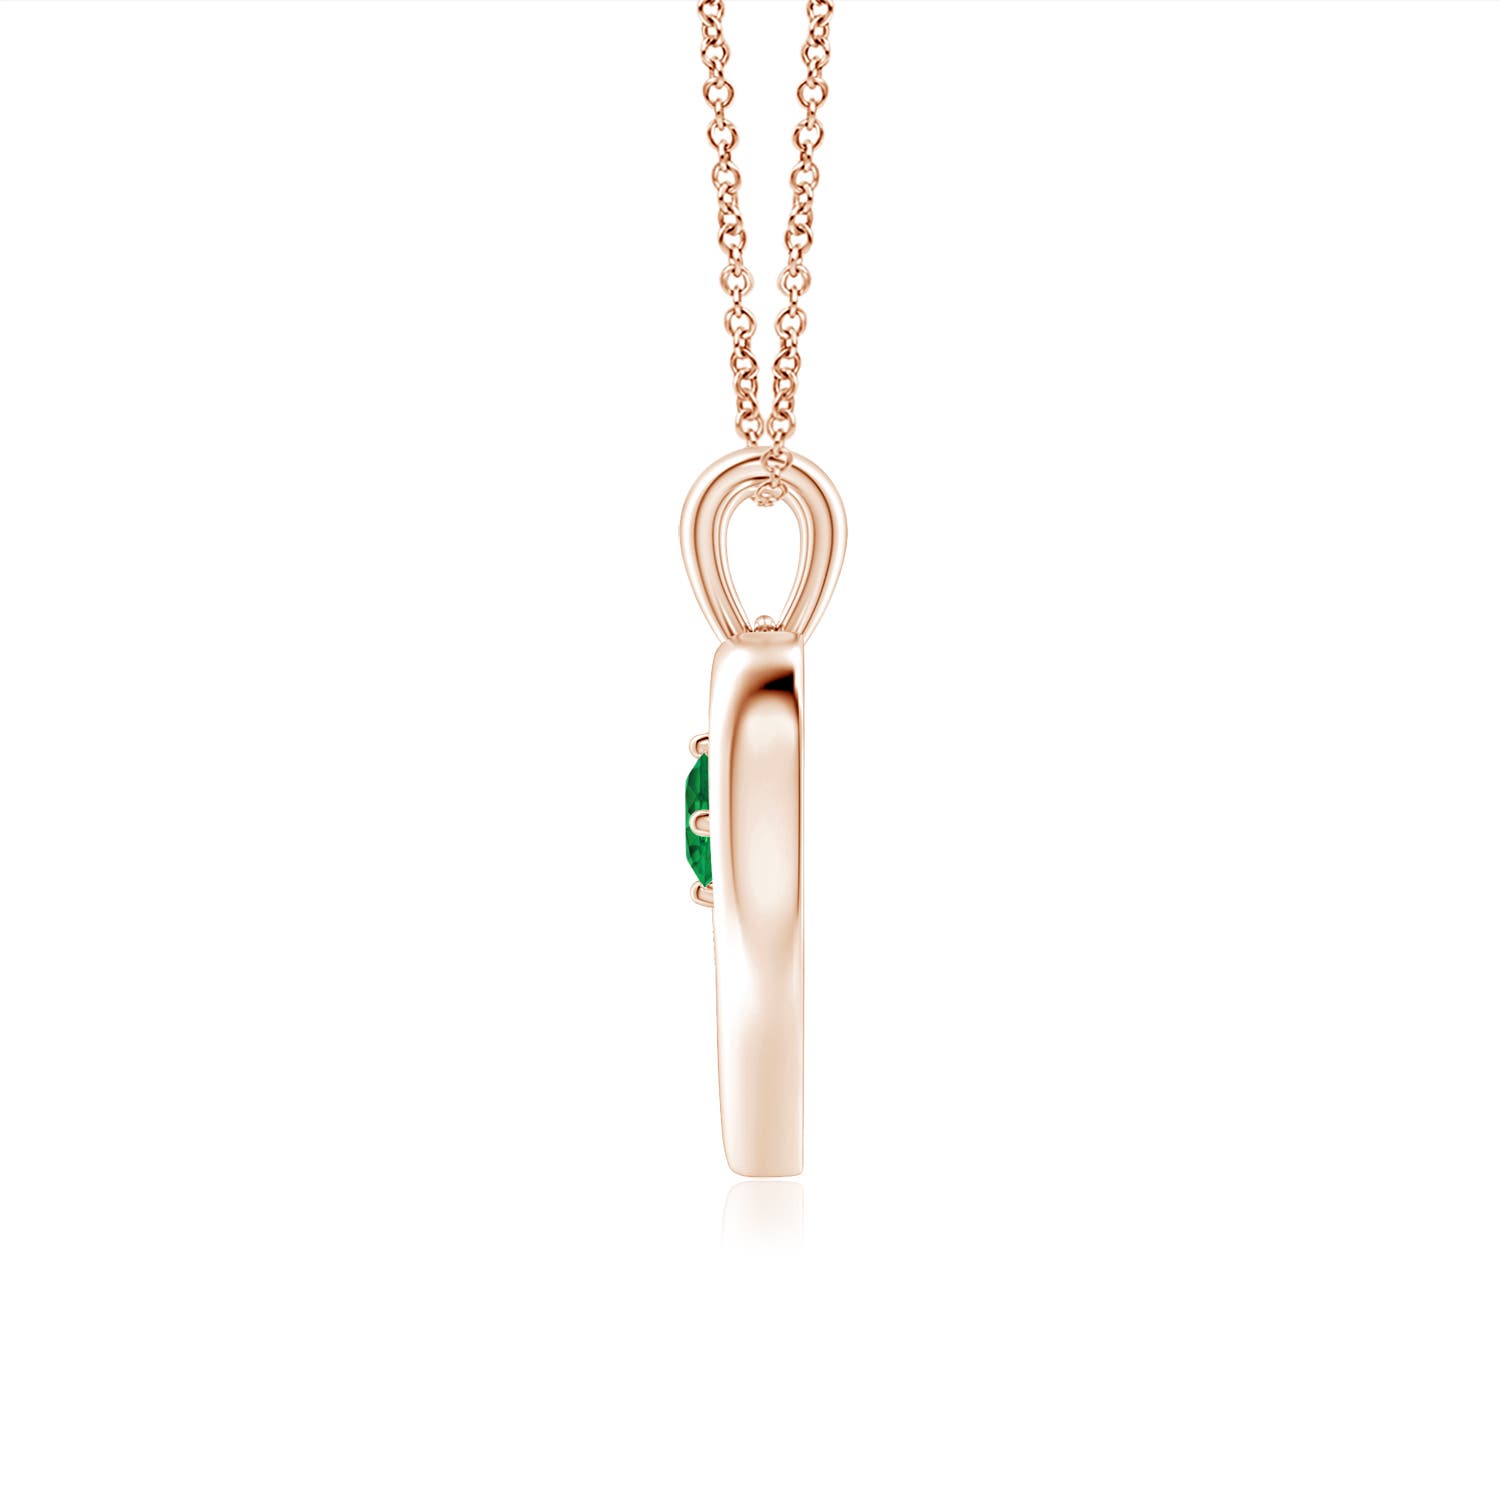 AAA - Emerald / 0.1 CT / 14 KT Rose Gold